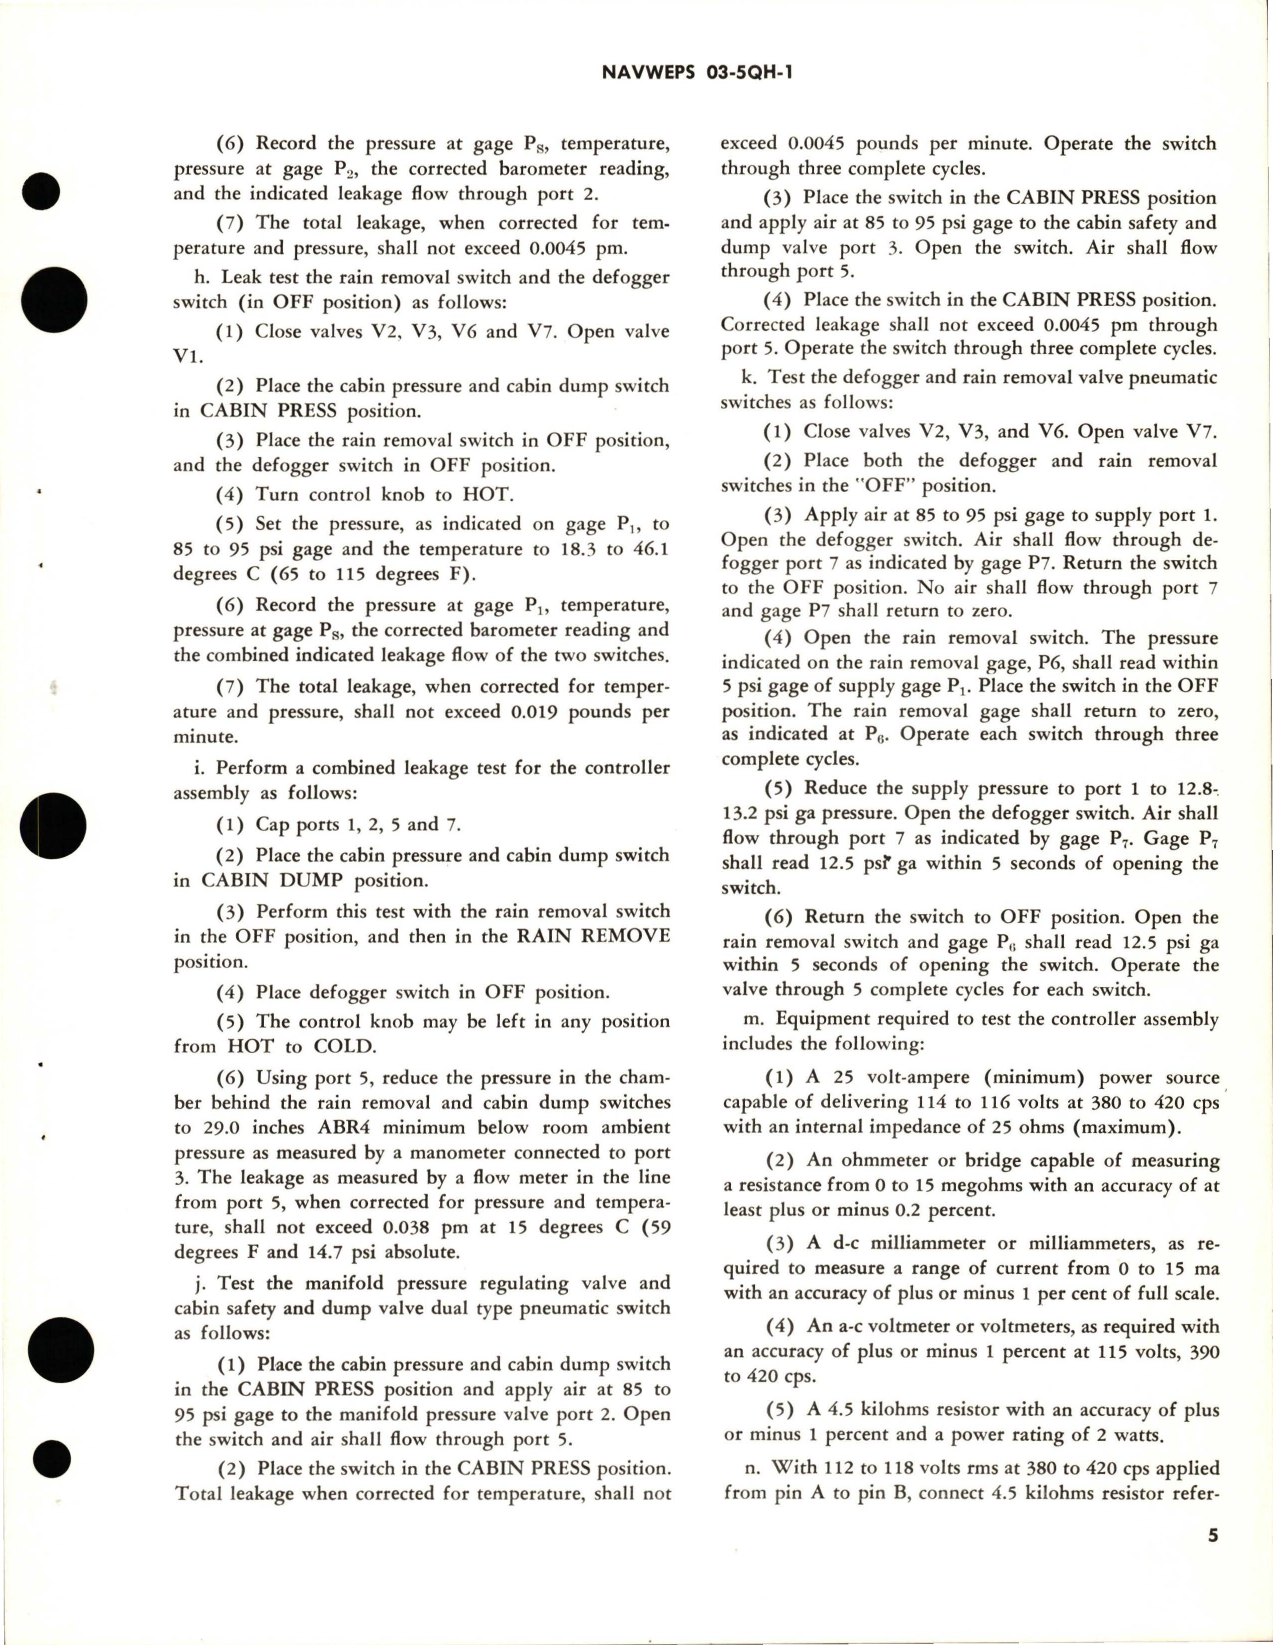 Sample page 5 from AirCorps Library document: Overhaul Instructions with Parts Breakdown for Manual Panel Control - Part 549877